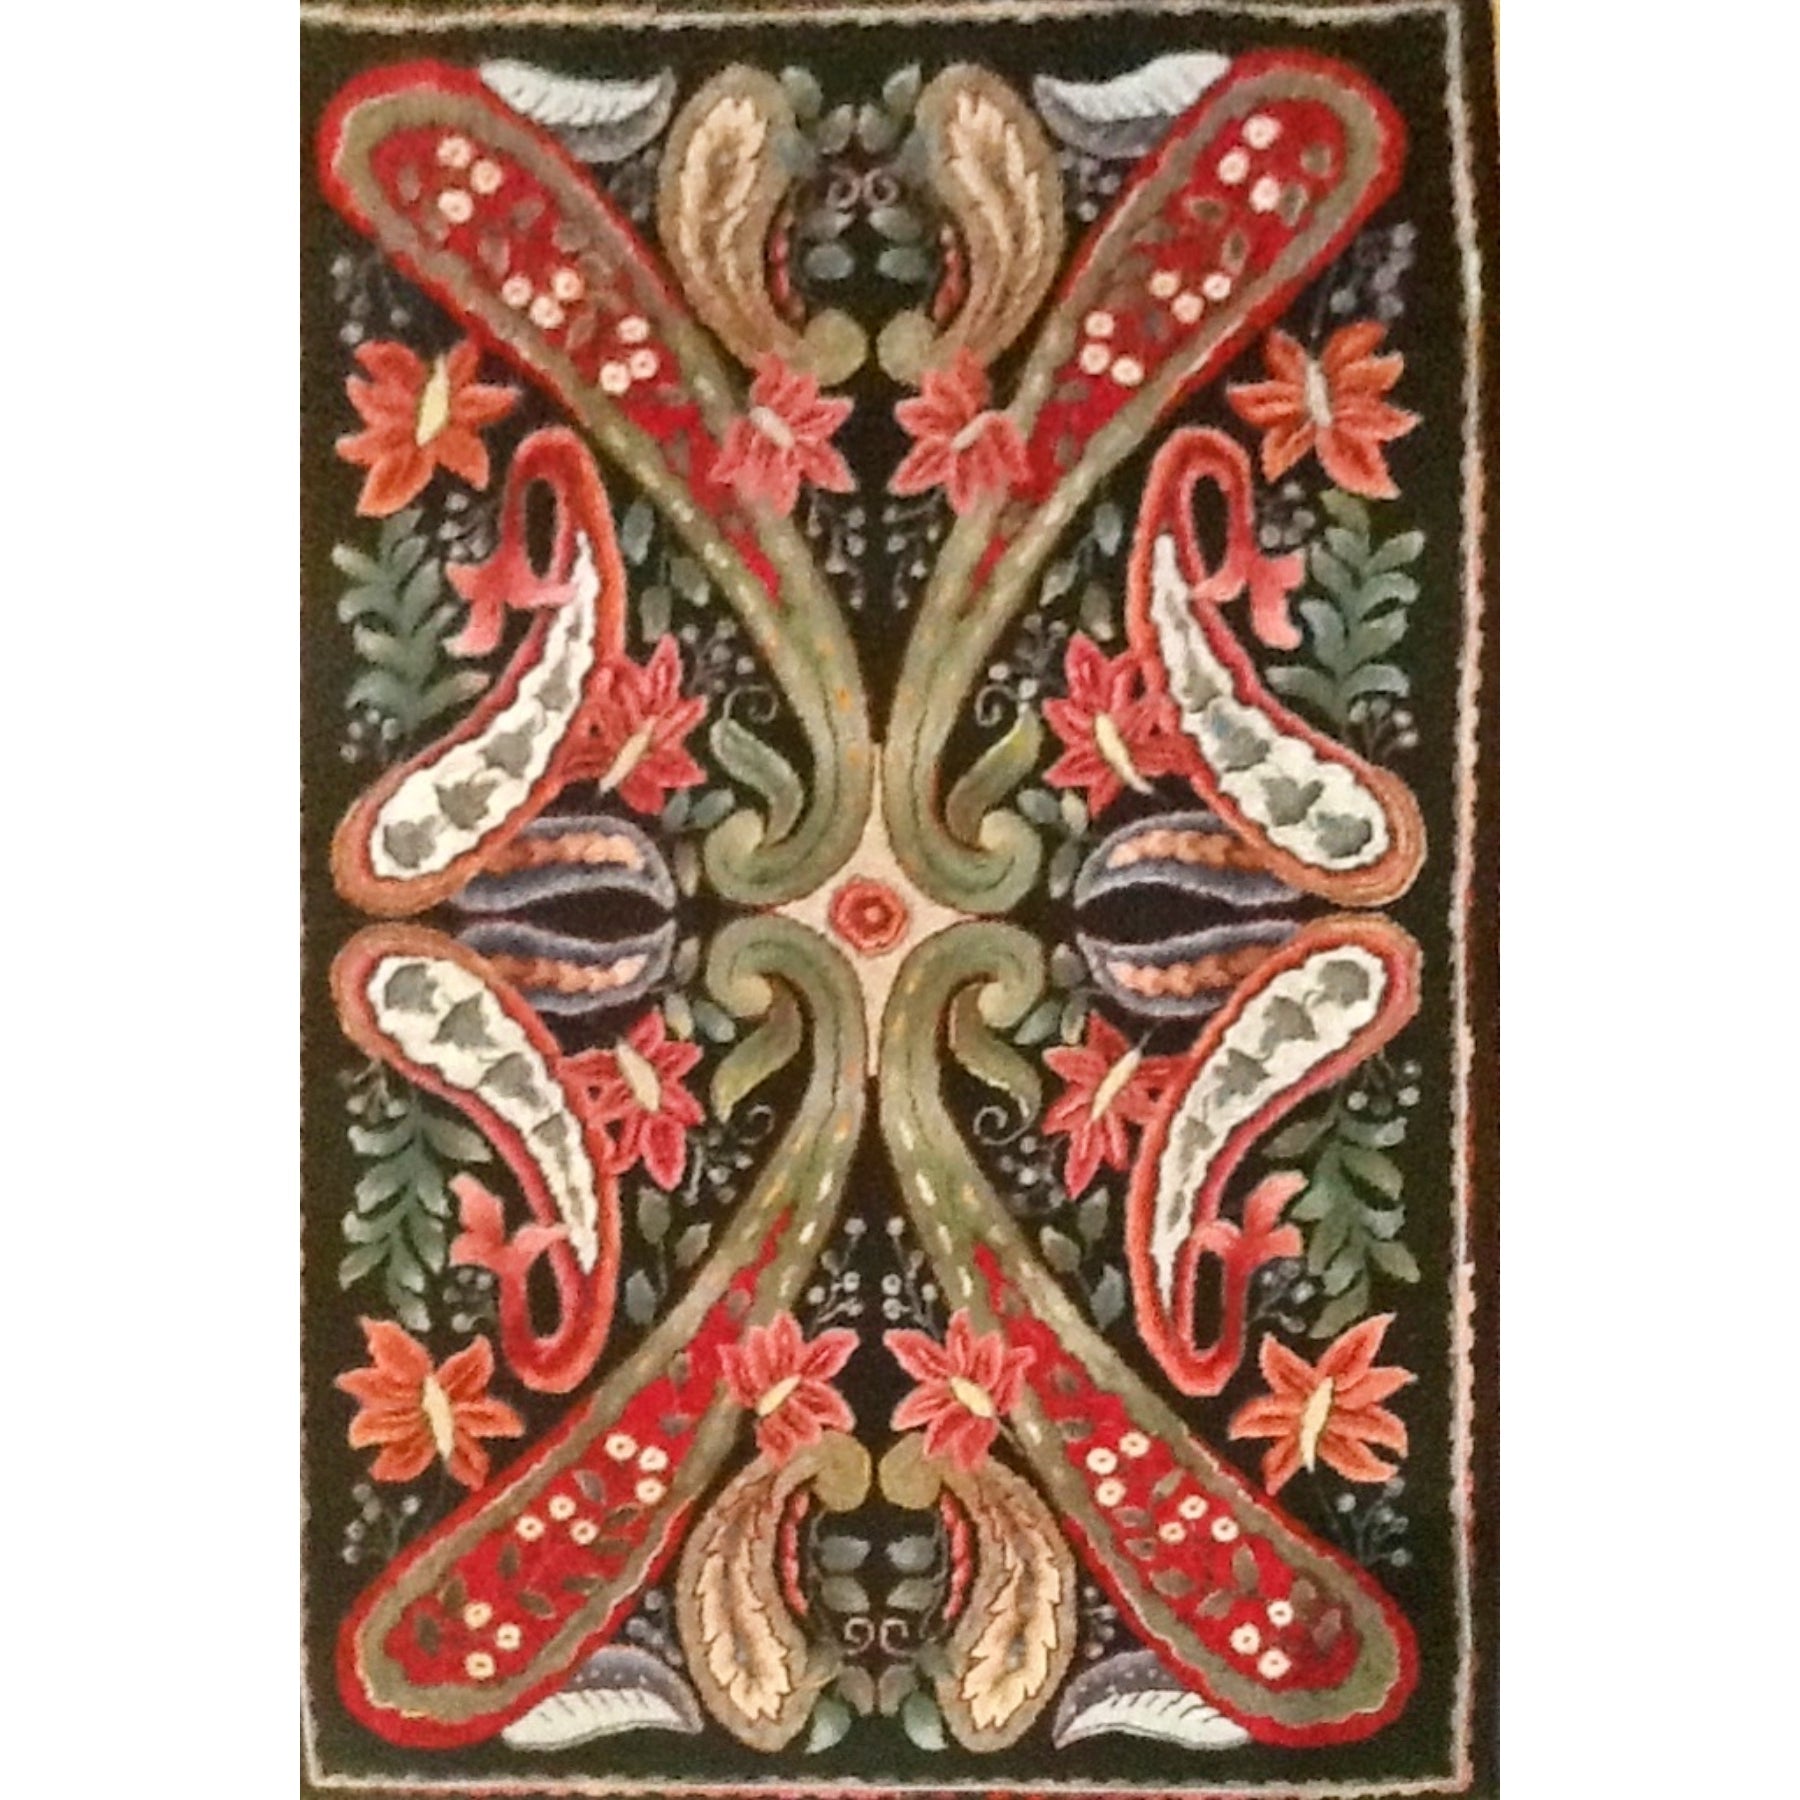 Pasha, rug hooked by Jane McGown Flynn